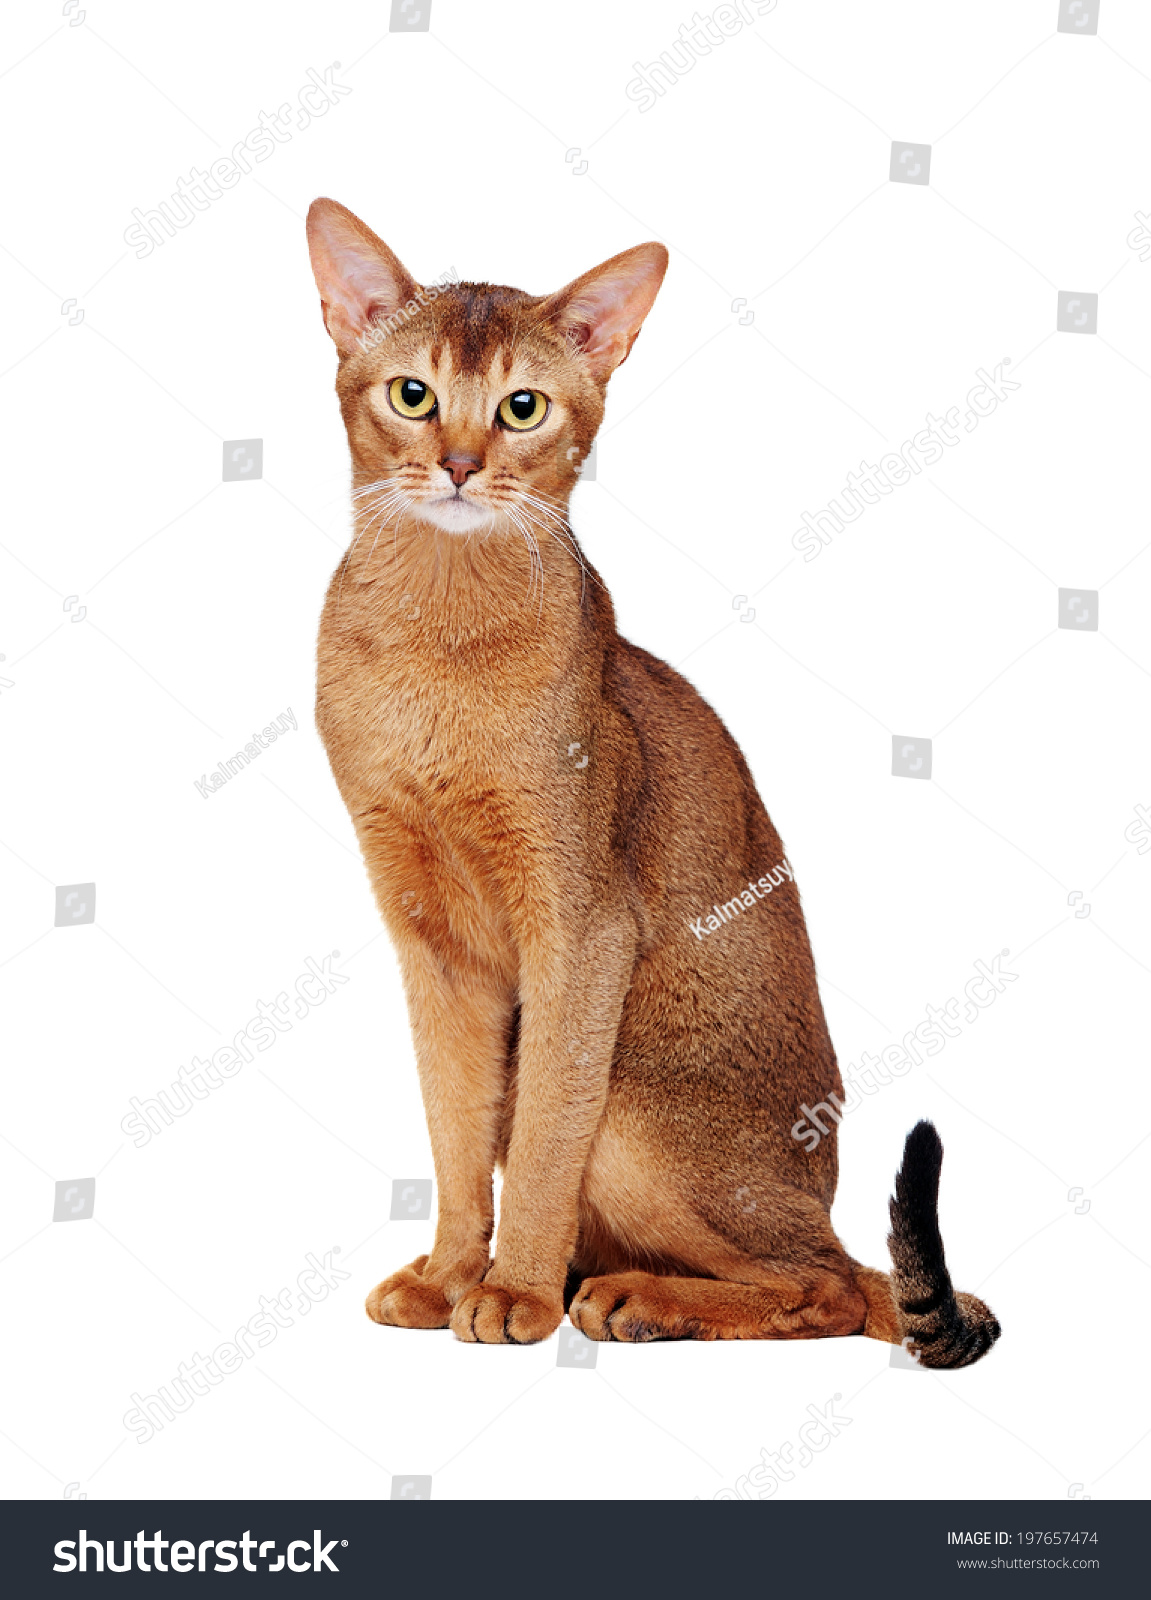 Abyssinian Cat Sitting Front View Portrait Stock Photo 197657474